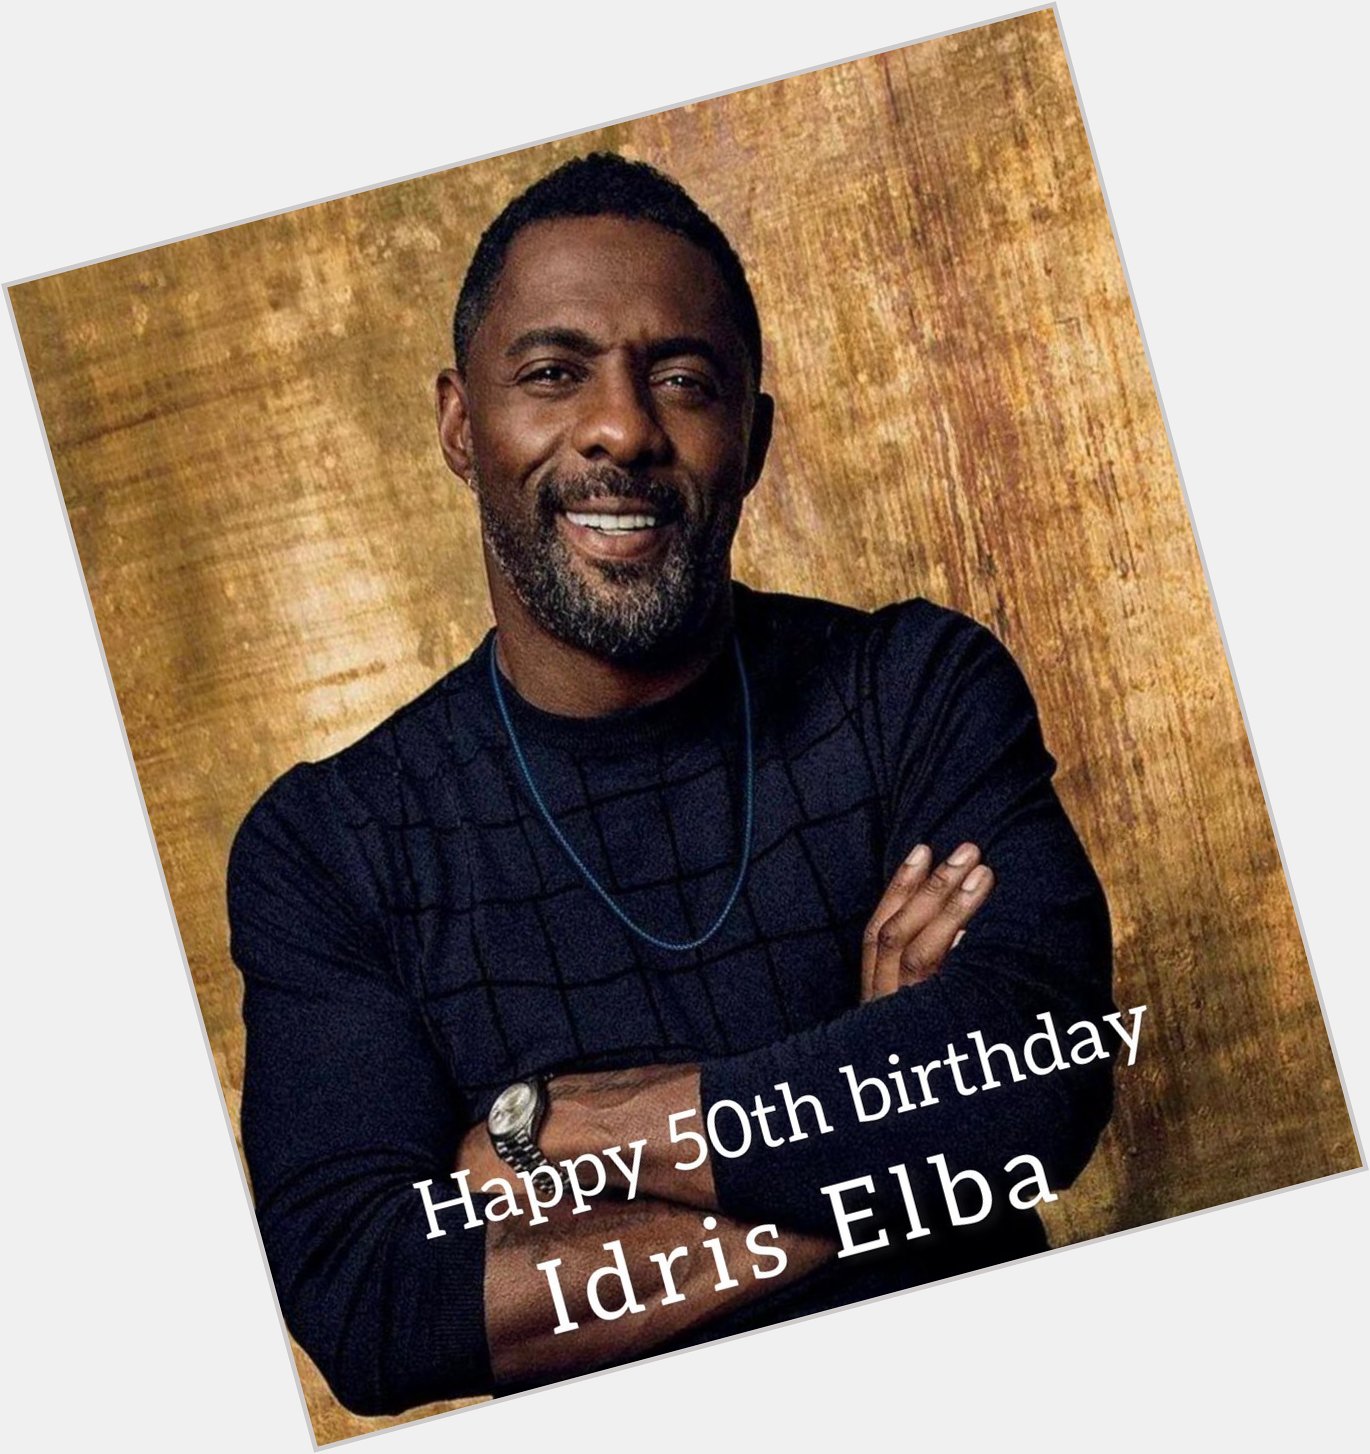 Join me in Wishing the Legendary Idris Elba A Happy 50th birthday    